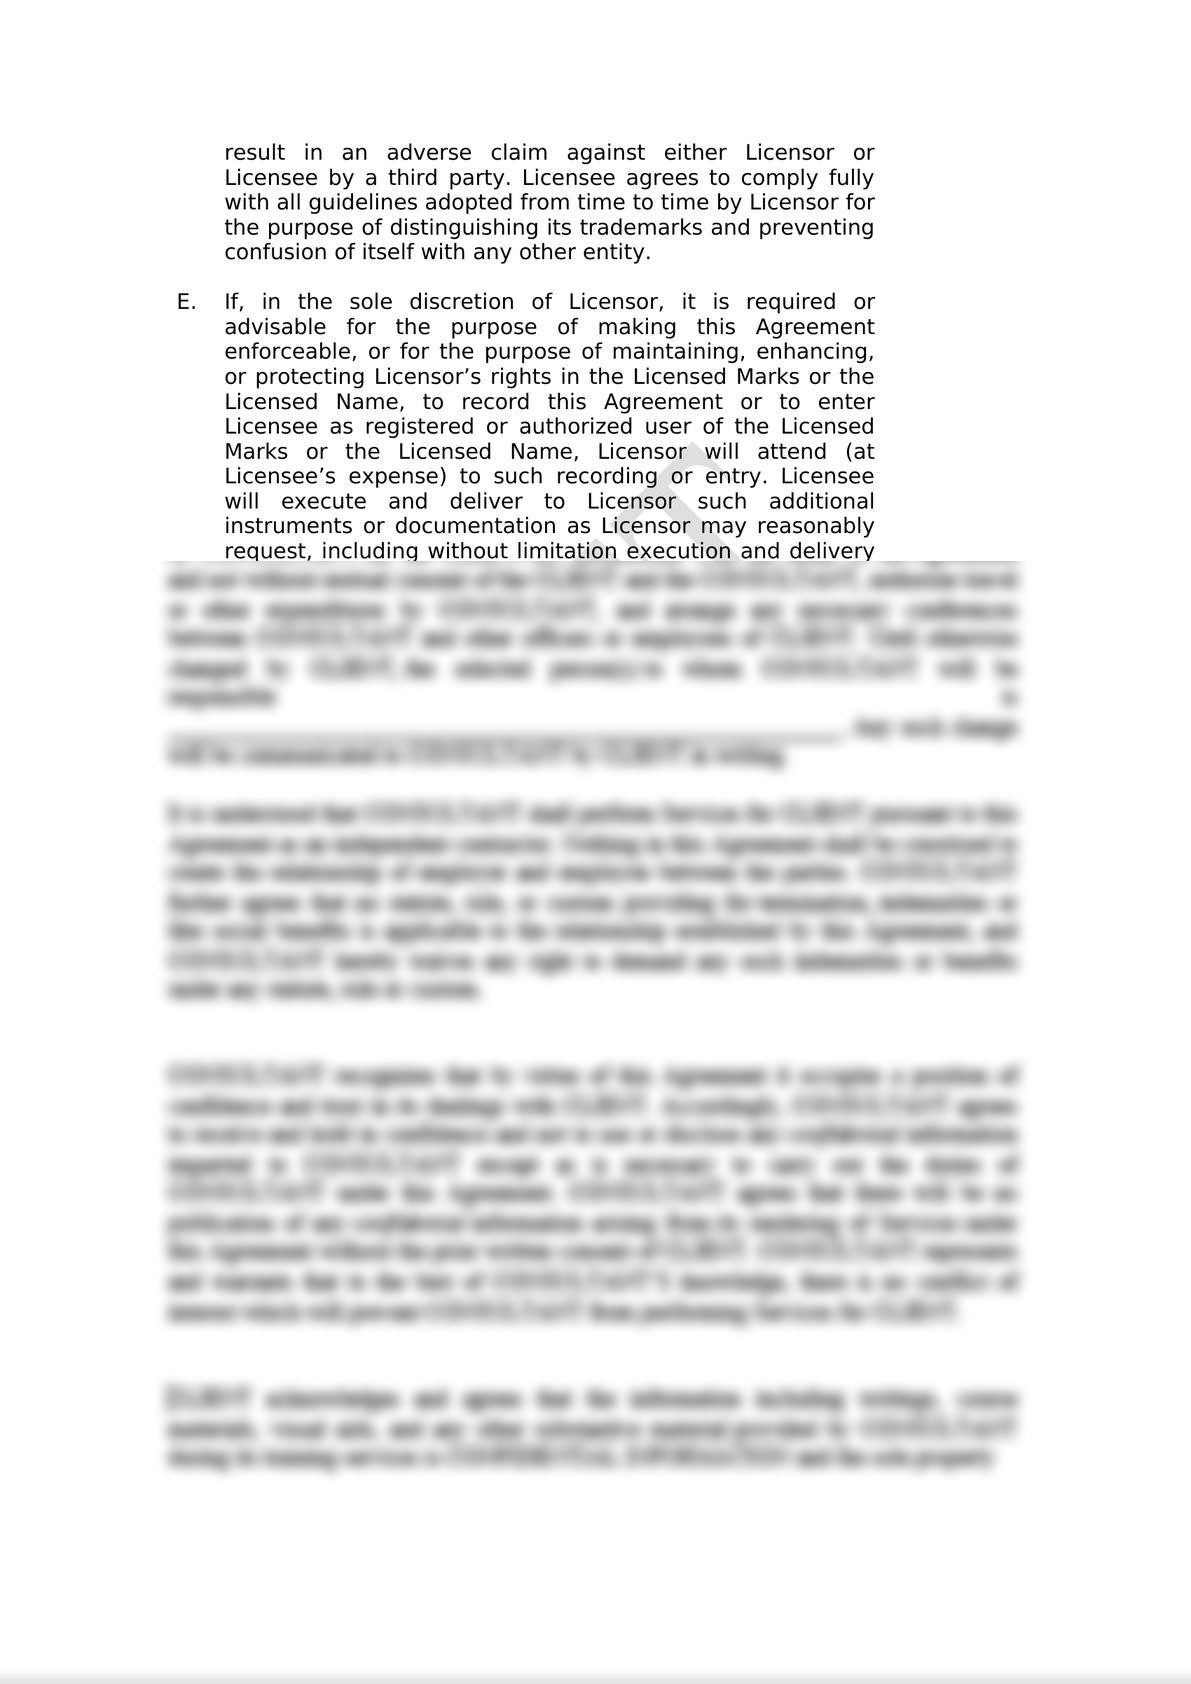 Inter-Company Intellectual Property Licensing Agreement-7